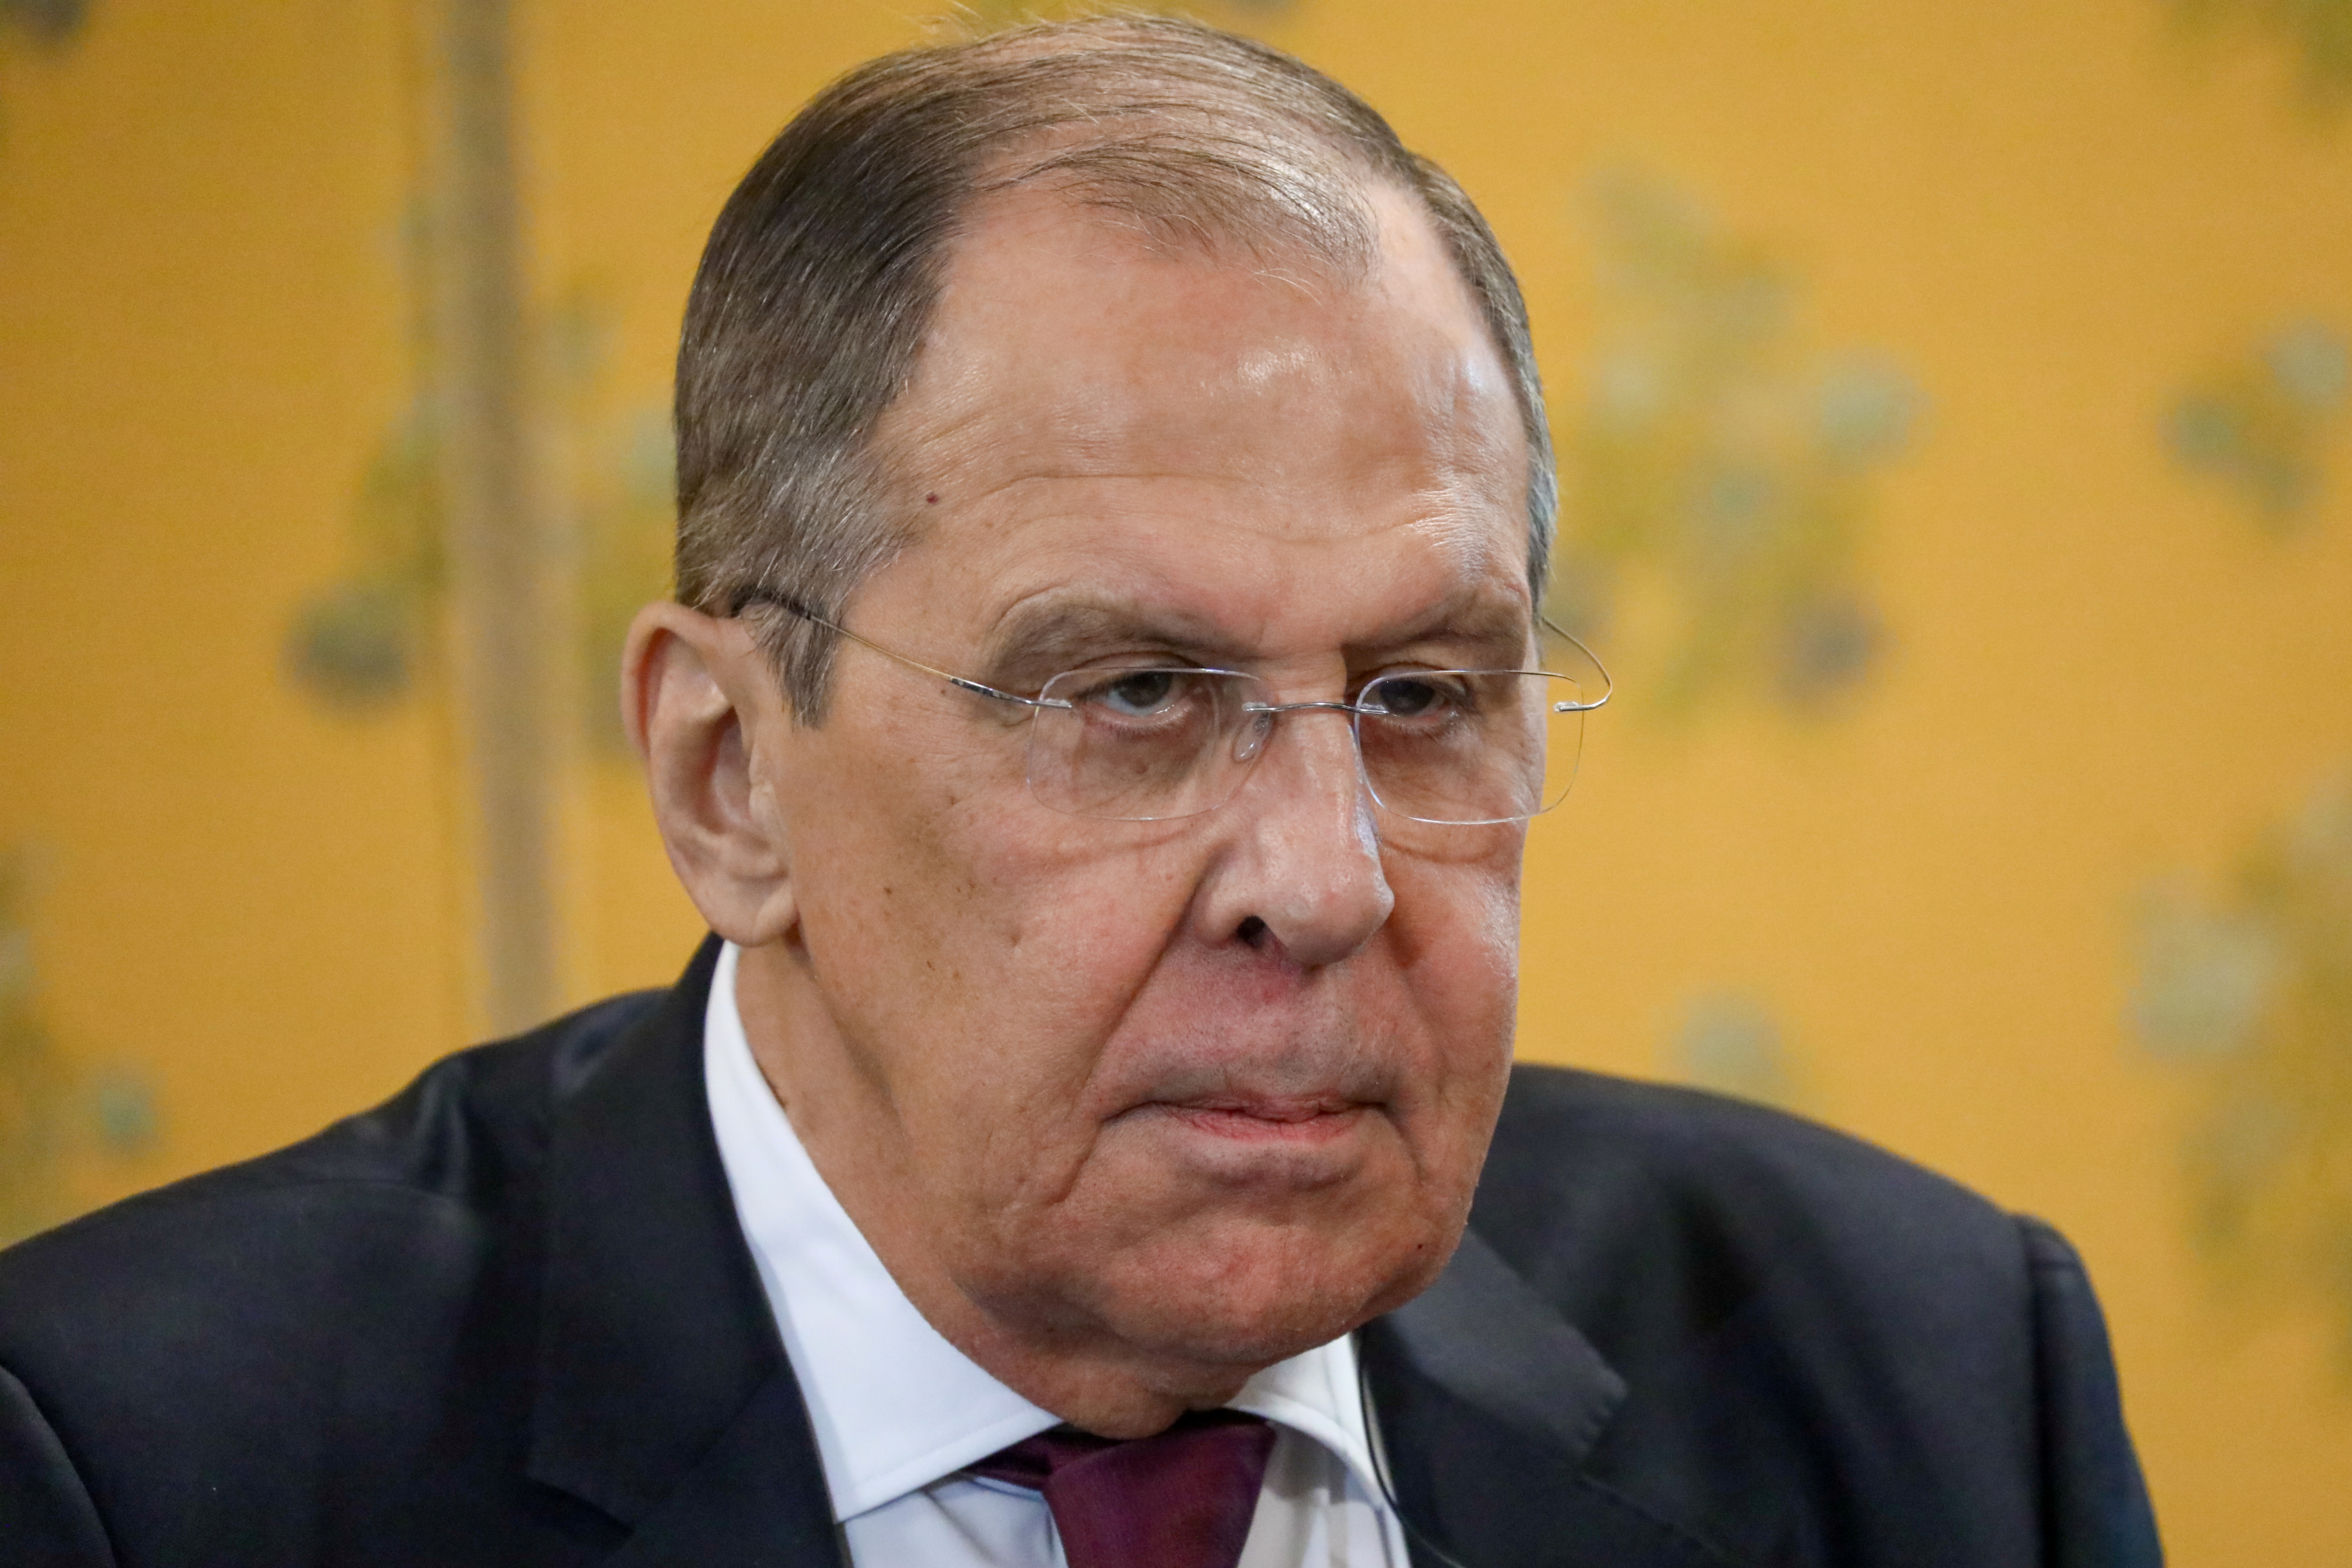 Russian Foreign Minister Sergei Lavrov attends a meeting on the sidelines of the G20 leaders' summit in Rome, Italy October 30, 2021. Russian Foreign Ministry/Handout via REUTERS/File Photo